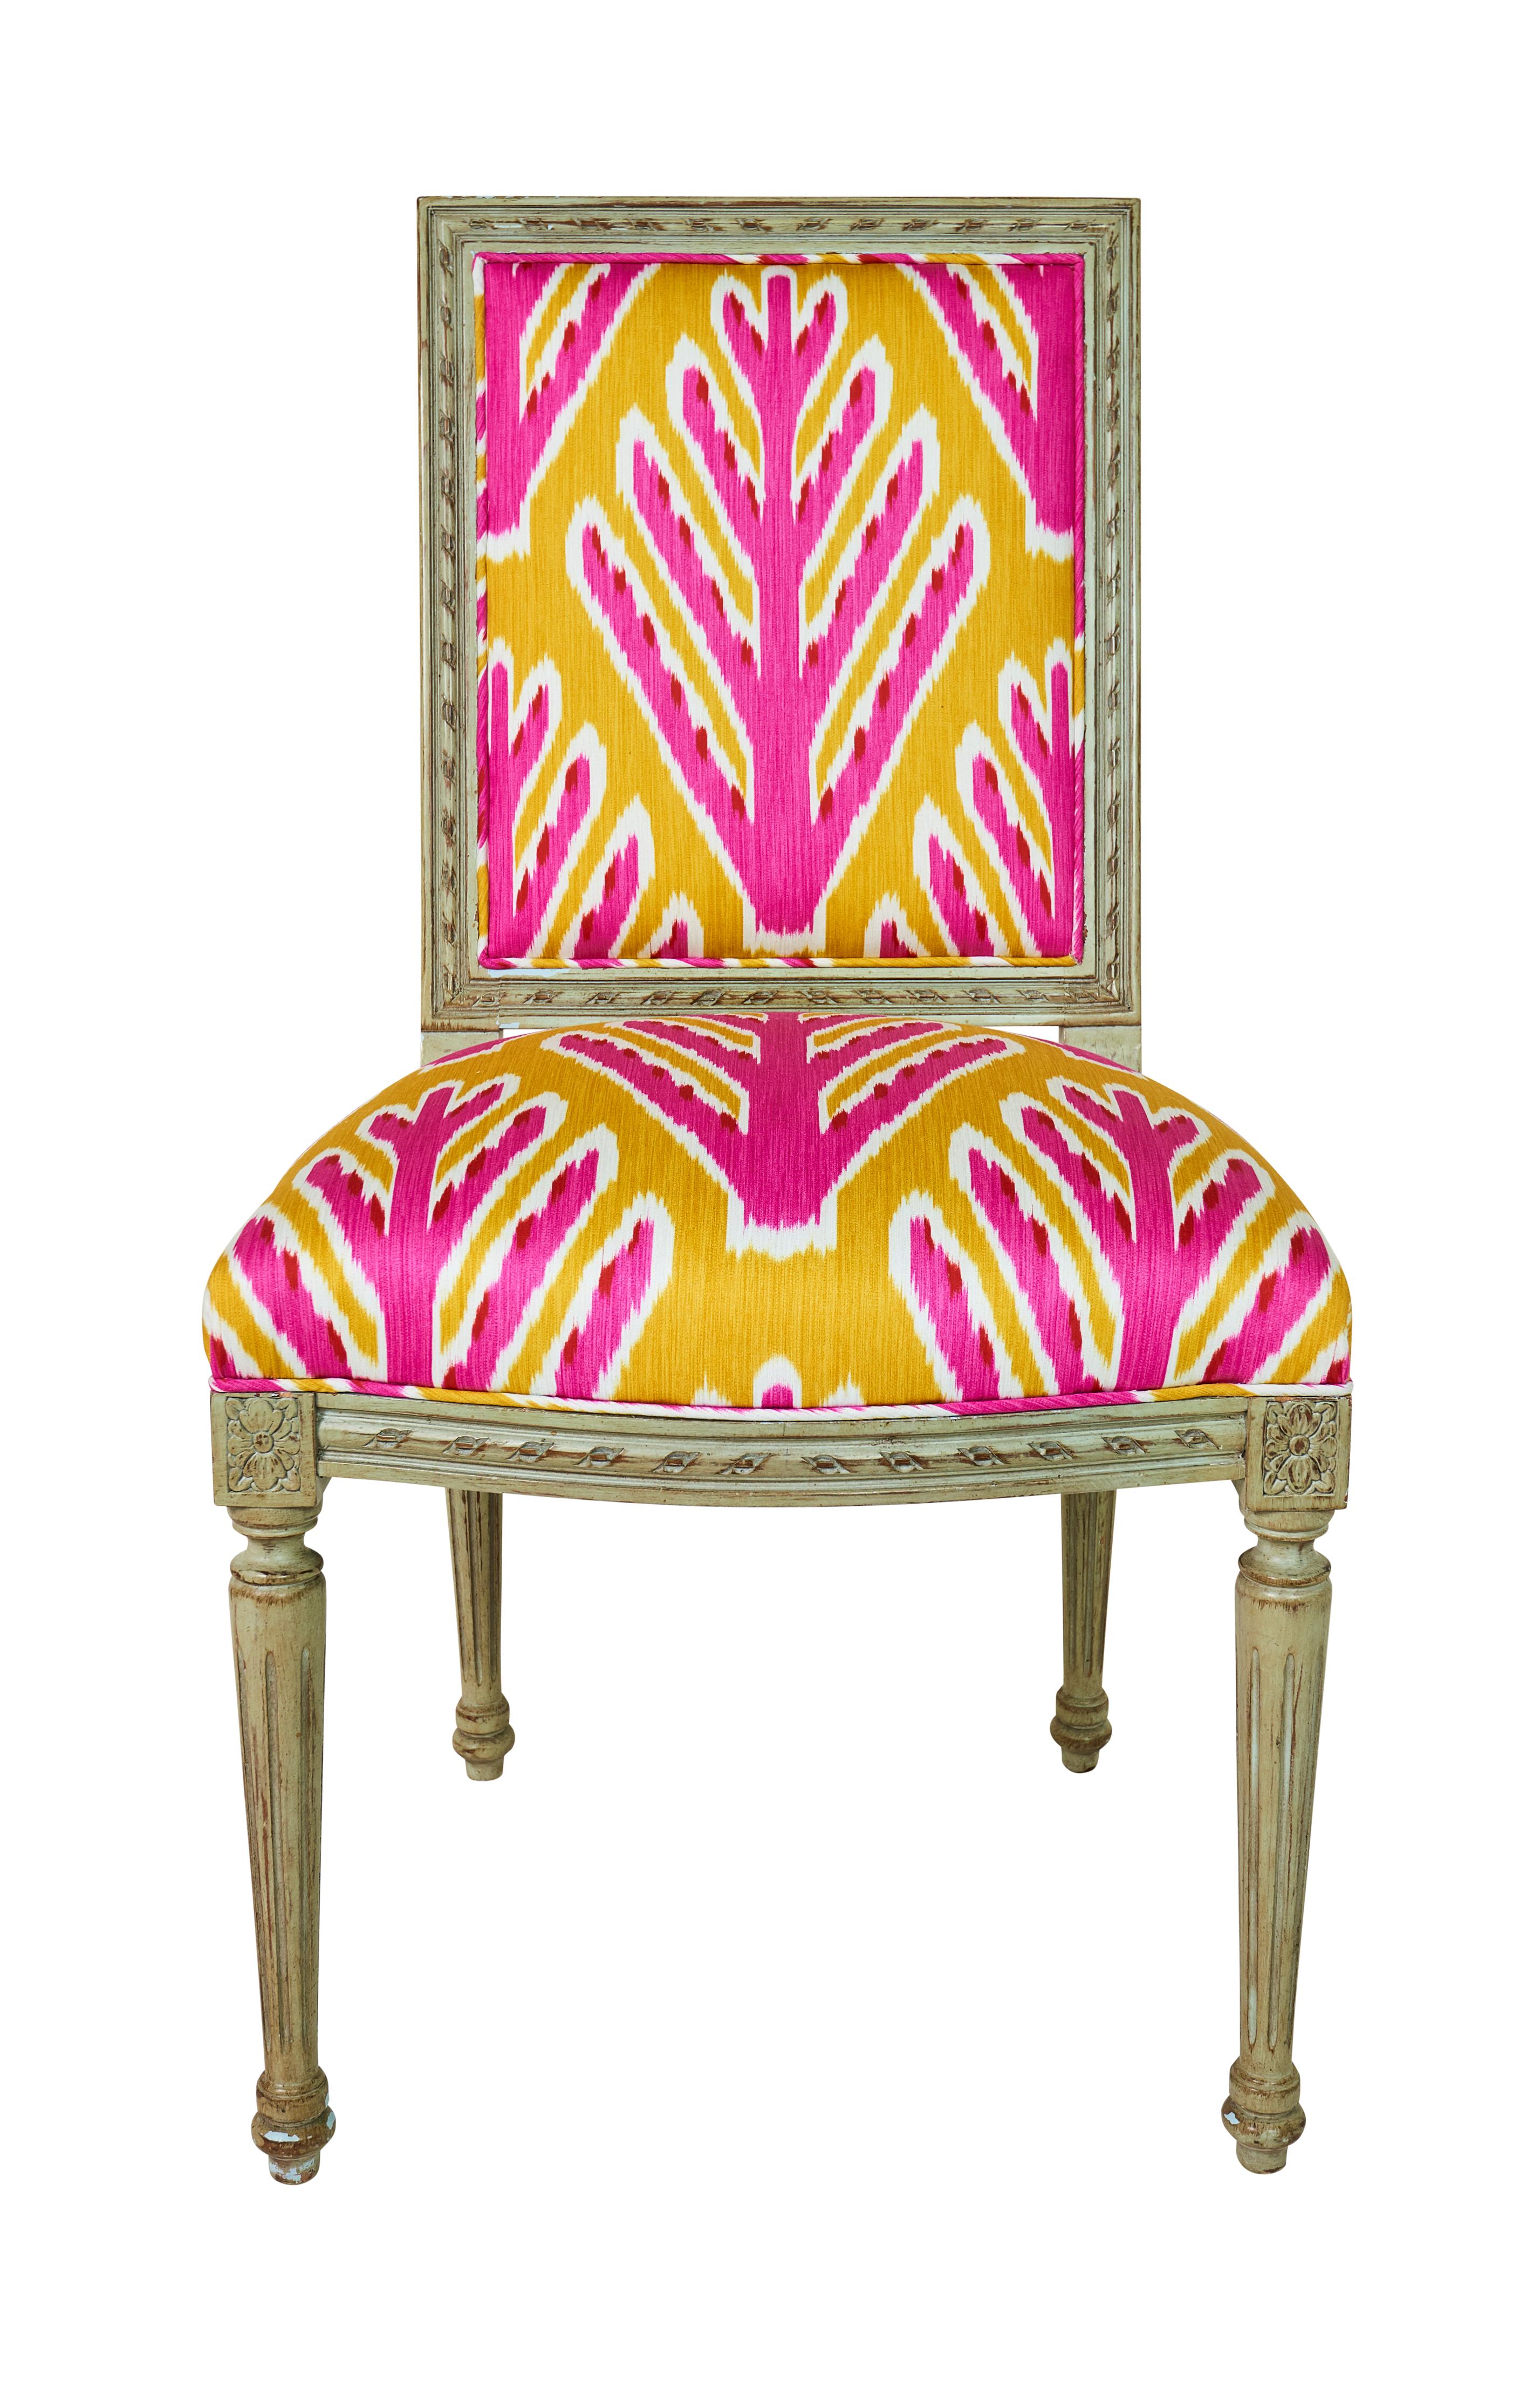 These Louis XVI side chairs are upholstered in Johnson Hartig/Libertine for Schumacher Bodhi Tree fabric in Yellow & Pink (178560).